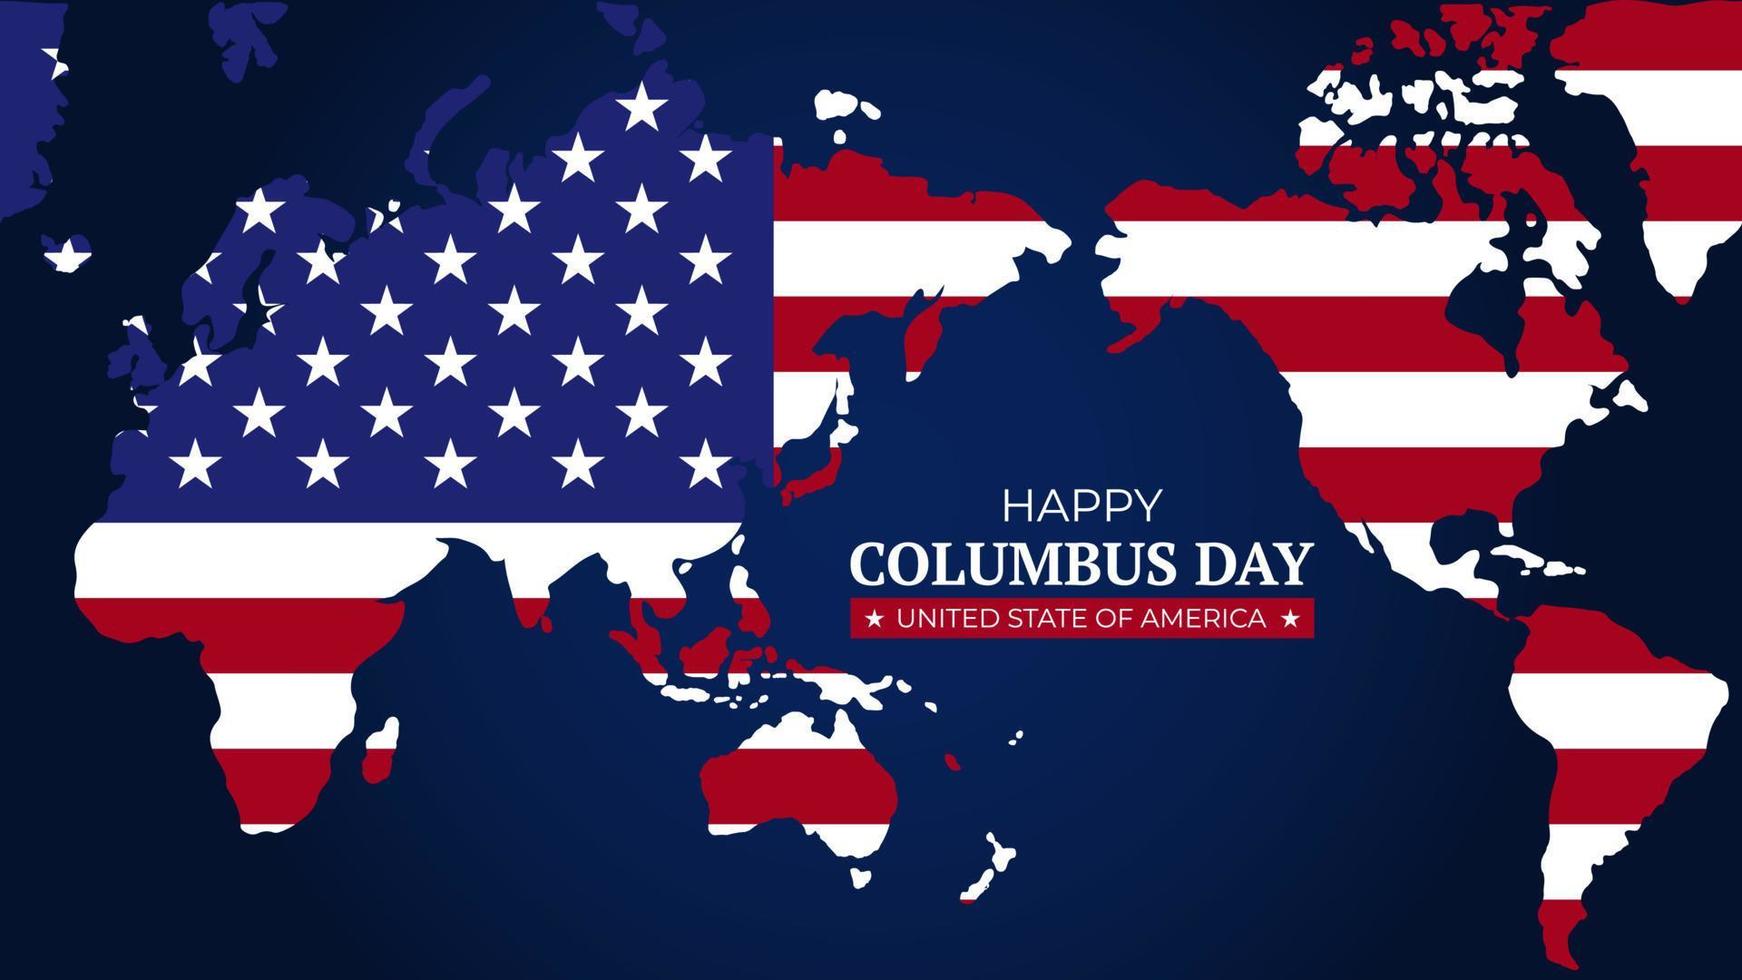 Columbus day united state of america background with world map vector